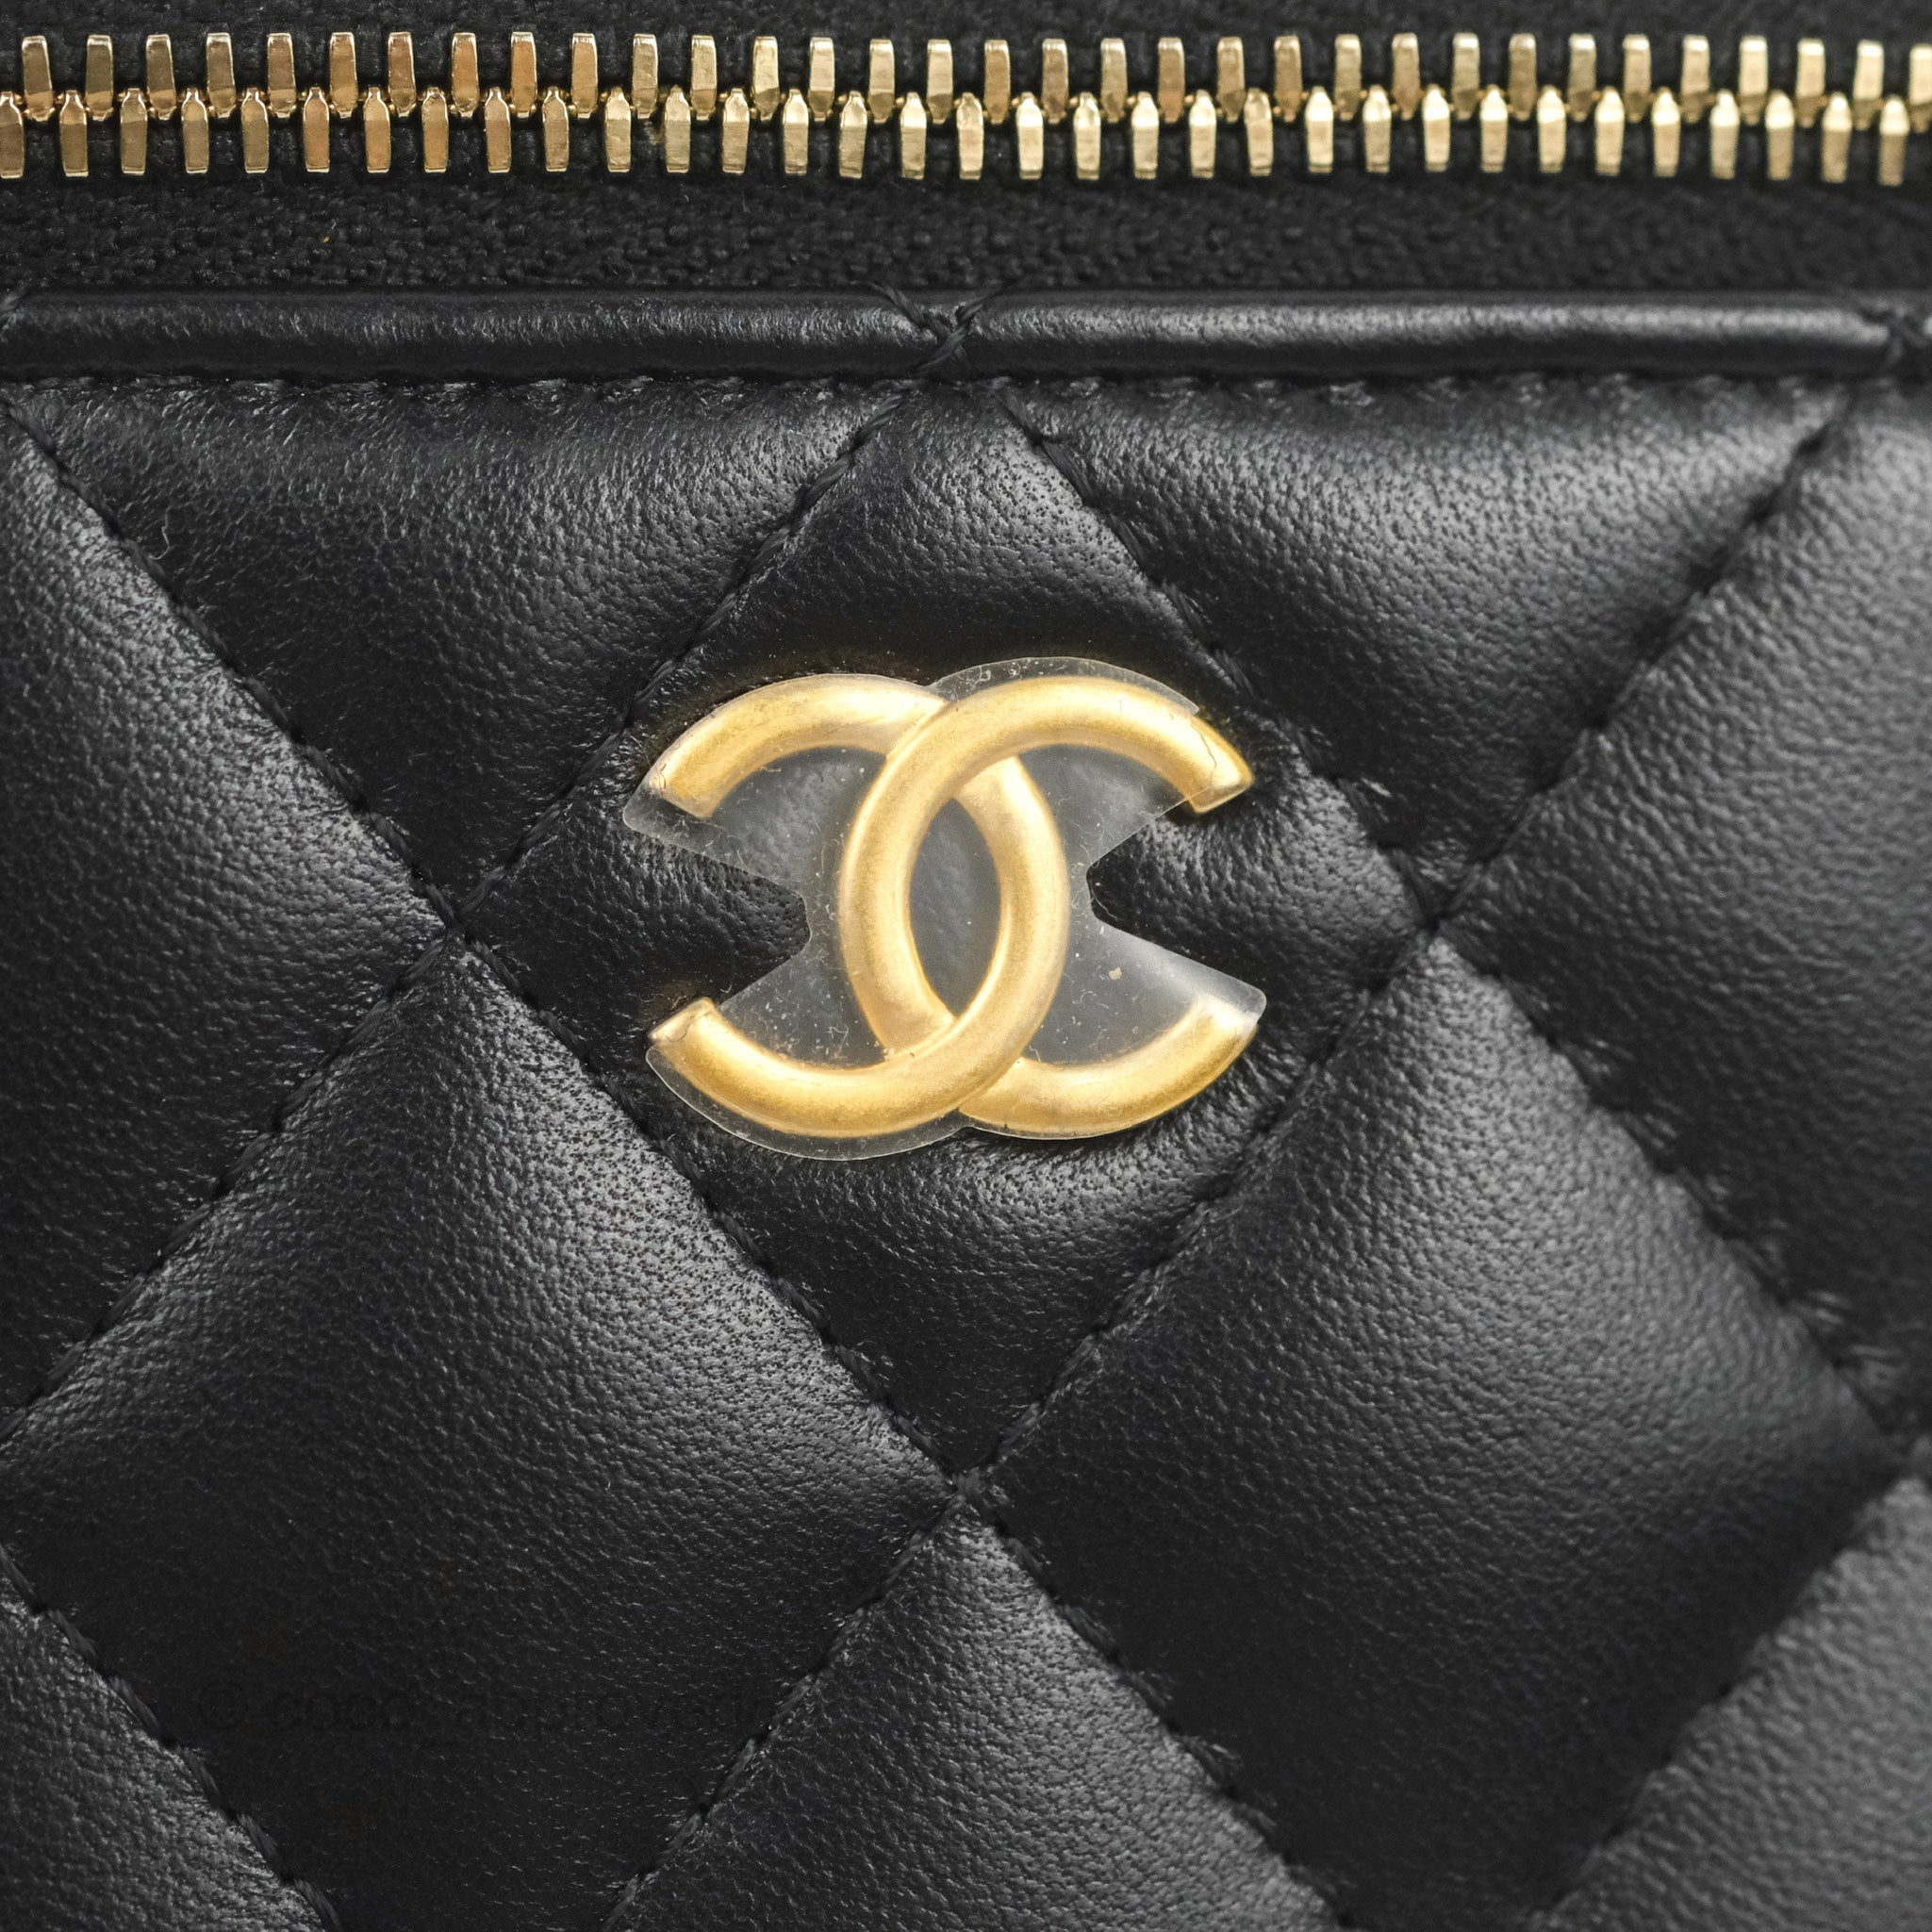 Chanel Small Coco Curve Flap Black Goatskin Antique Gold Hardware – Coco  Approved Studio